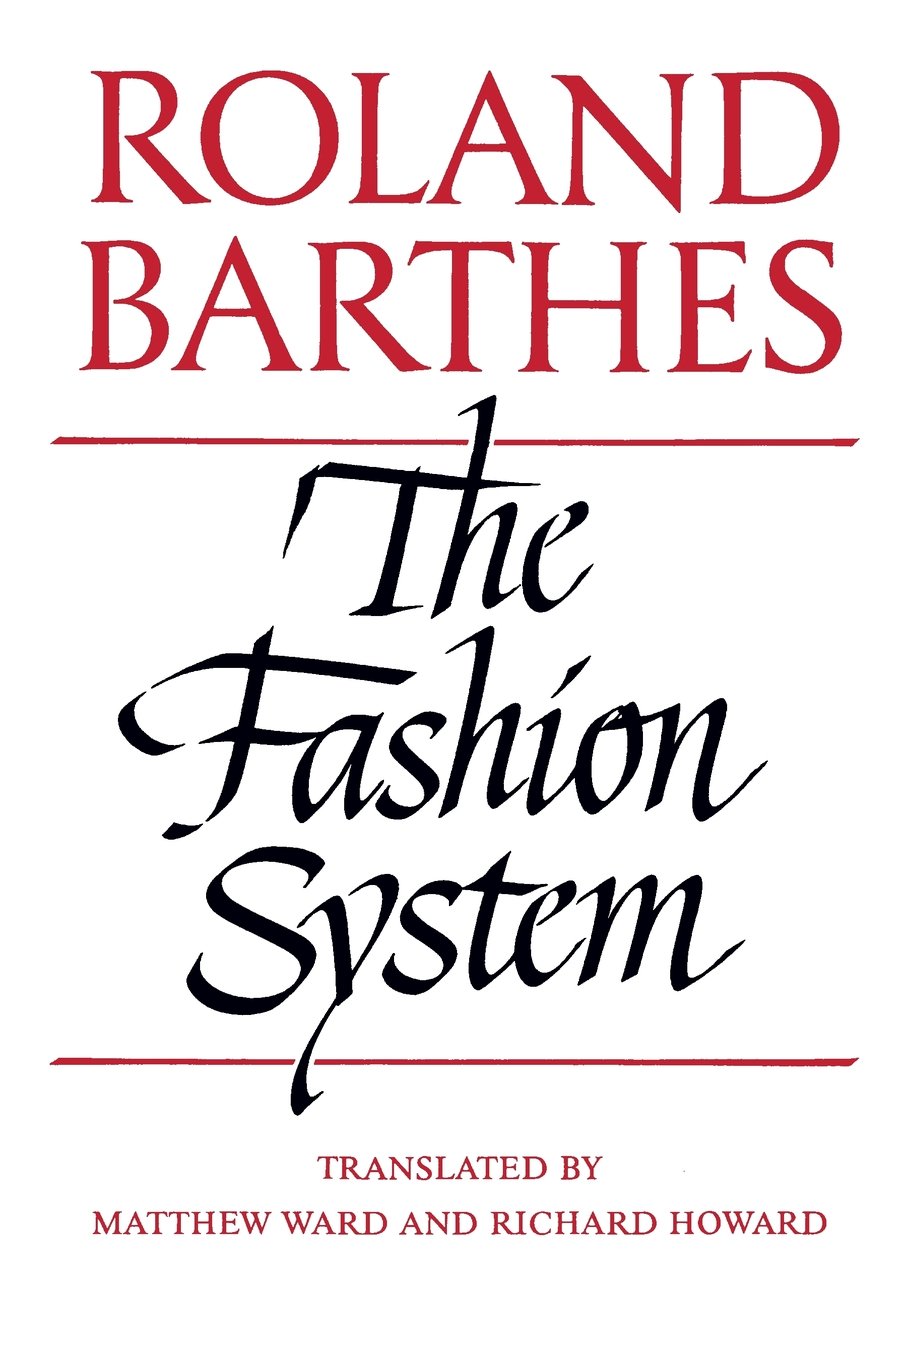 Reflection on “The Fashion System” by Roland Barthes